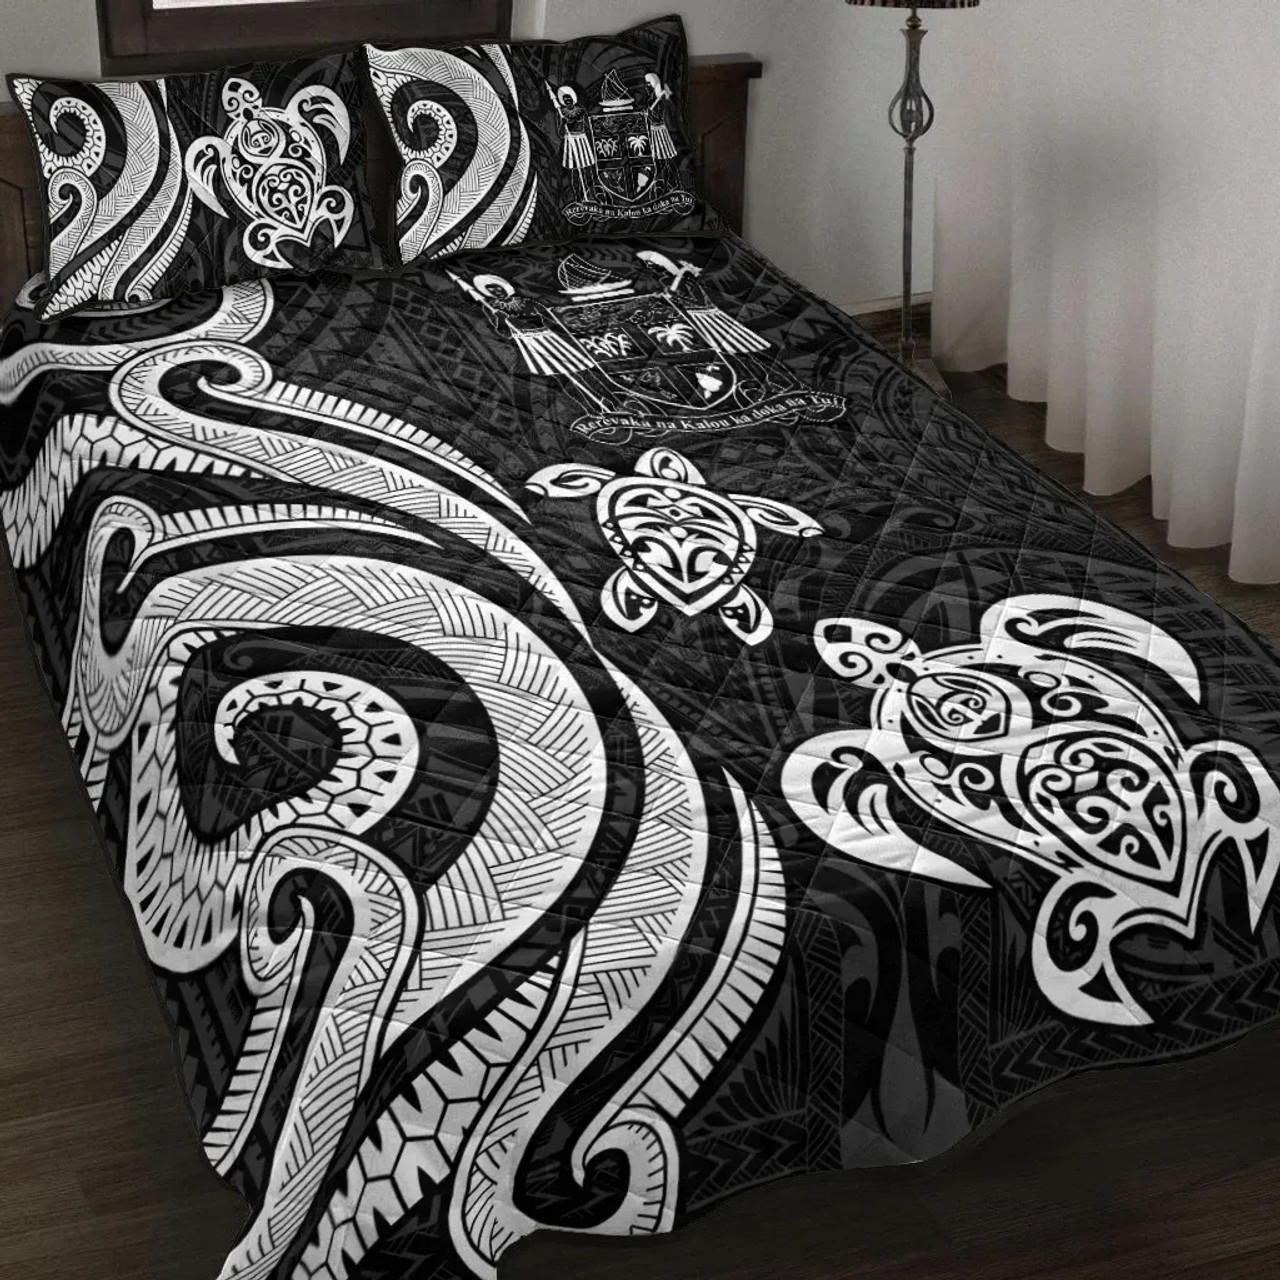 Fiji Quilt Bed Set - White Tentacle Turtle Crest 1